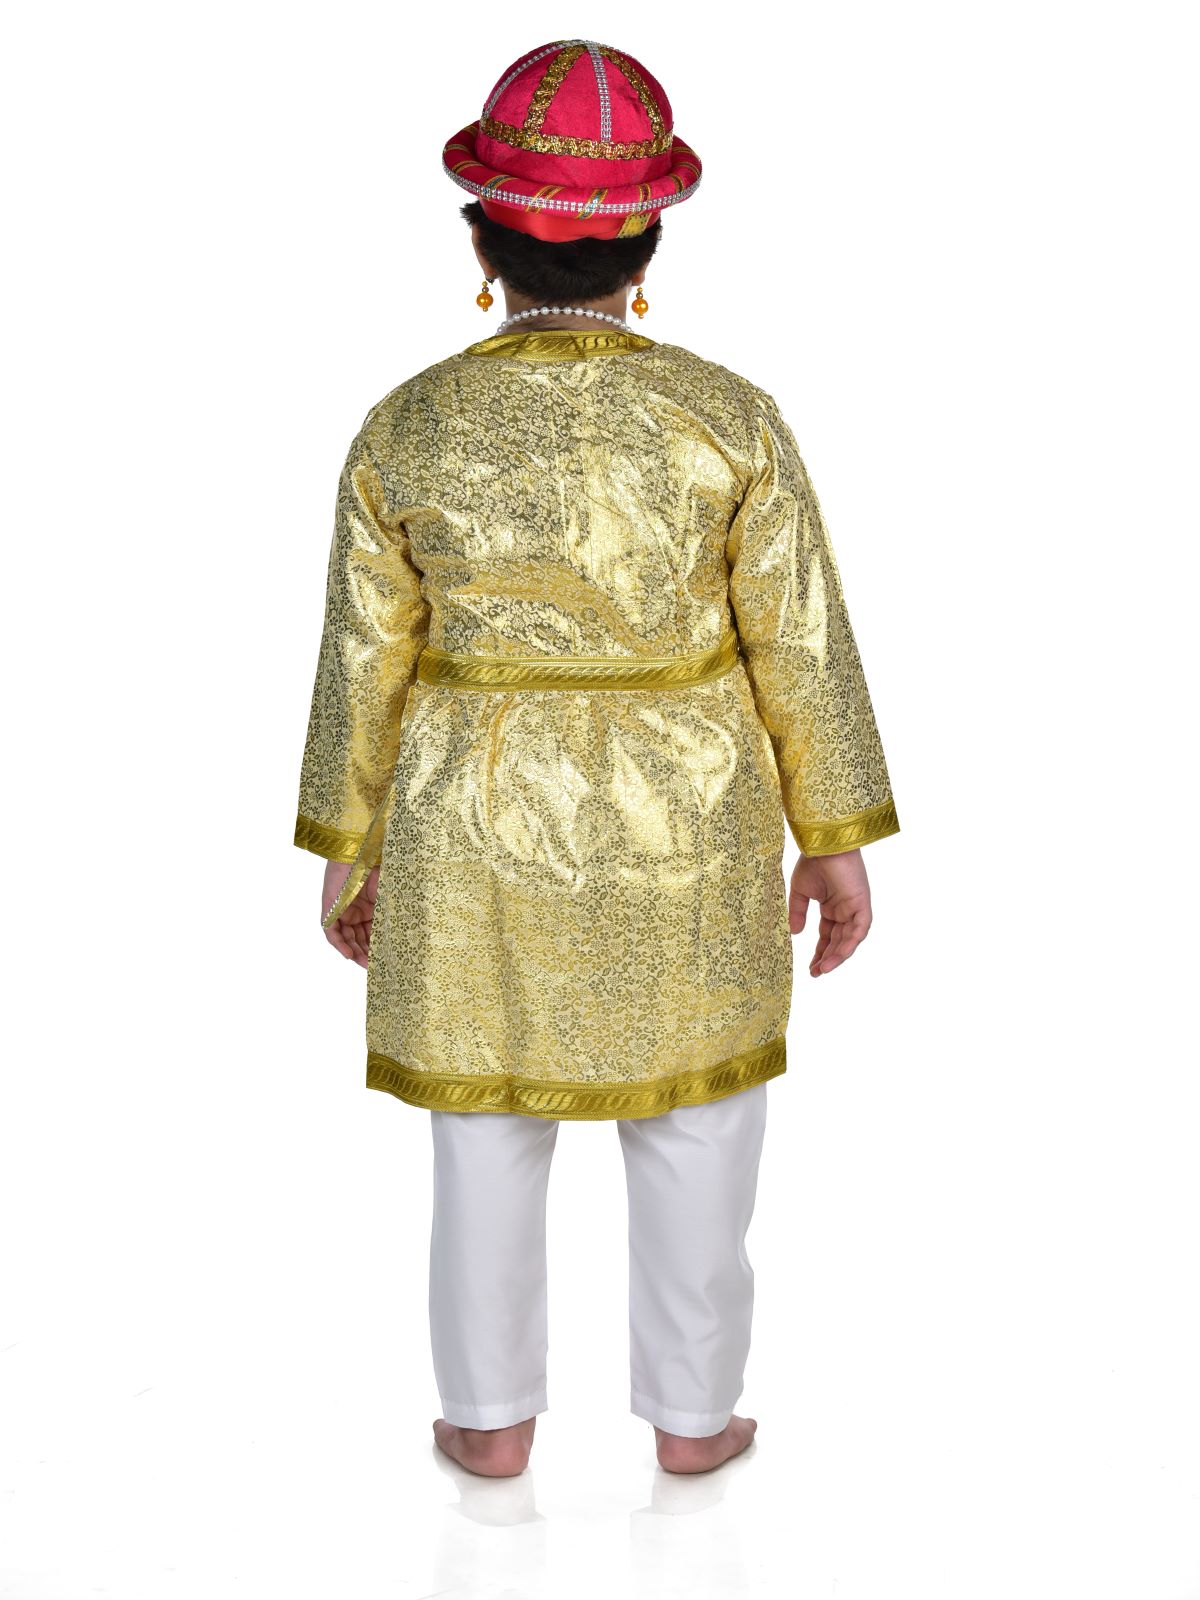 9 Republic day Fancy dress ideas for your kids; Indian Soldier to Astronaut